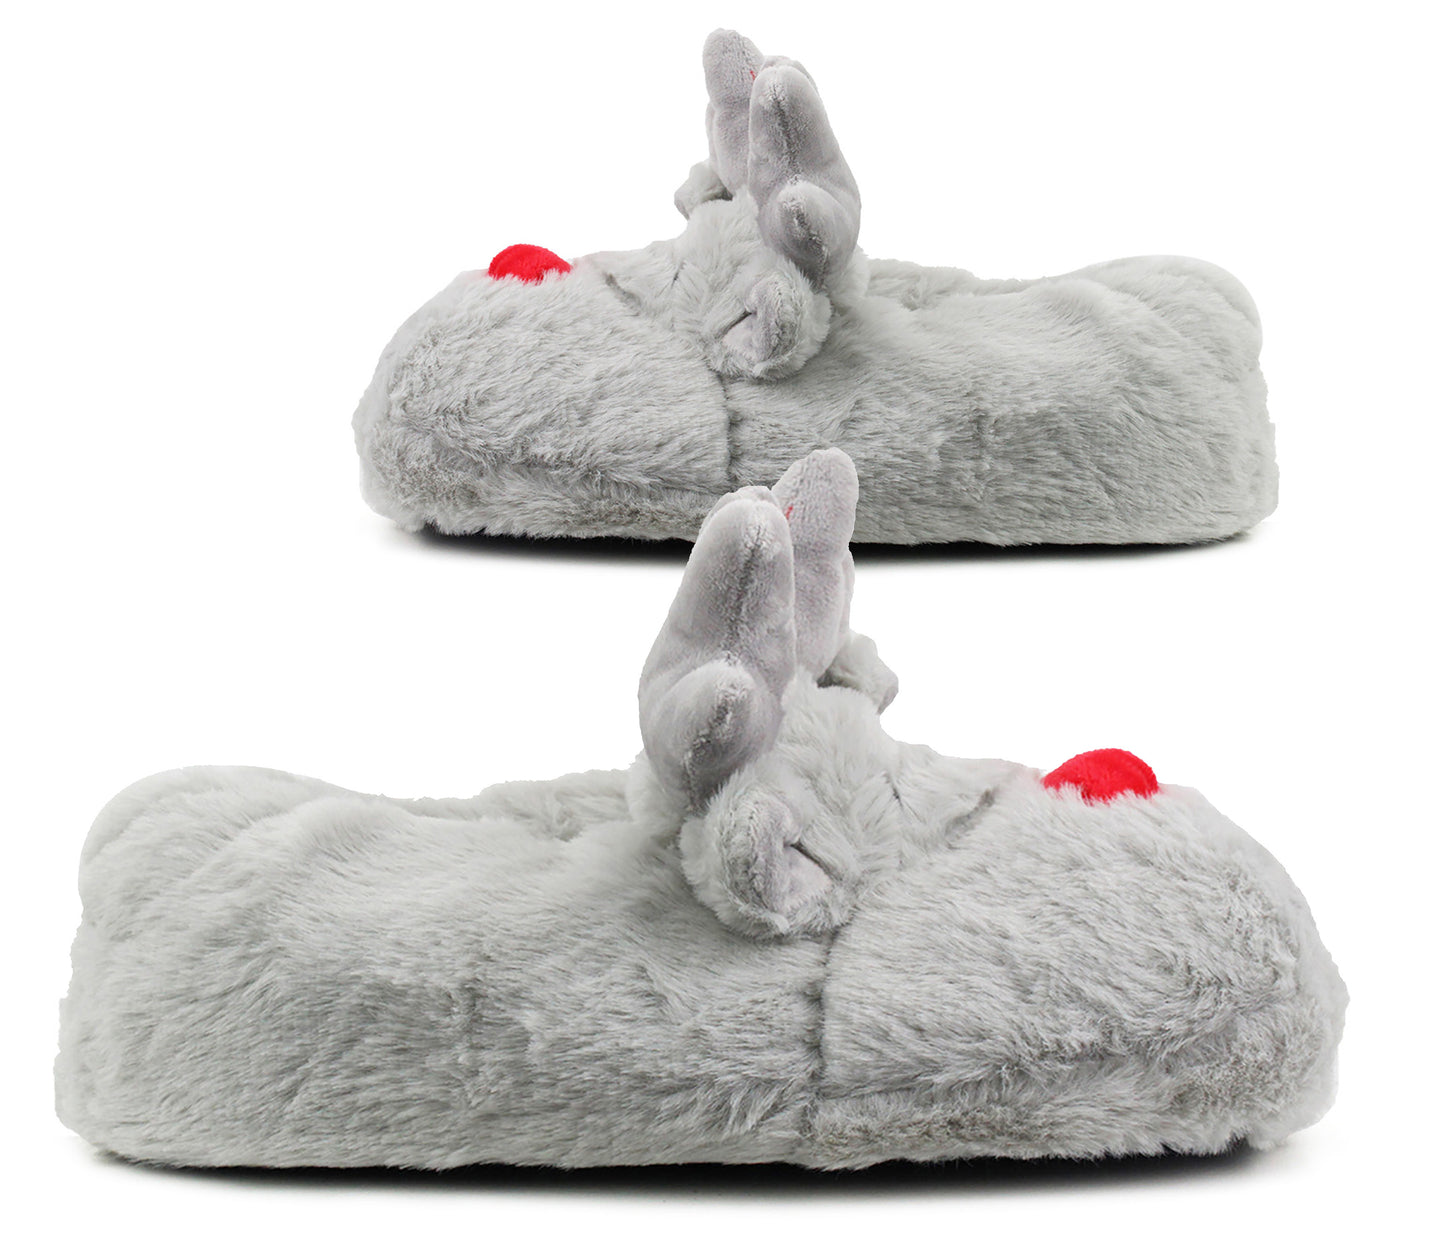 Womens Reindeer Novelty Slippers Character Grey Plush Ladies Festive Fun Christmas Fluffy Animal Slippers